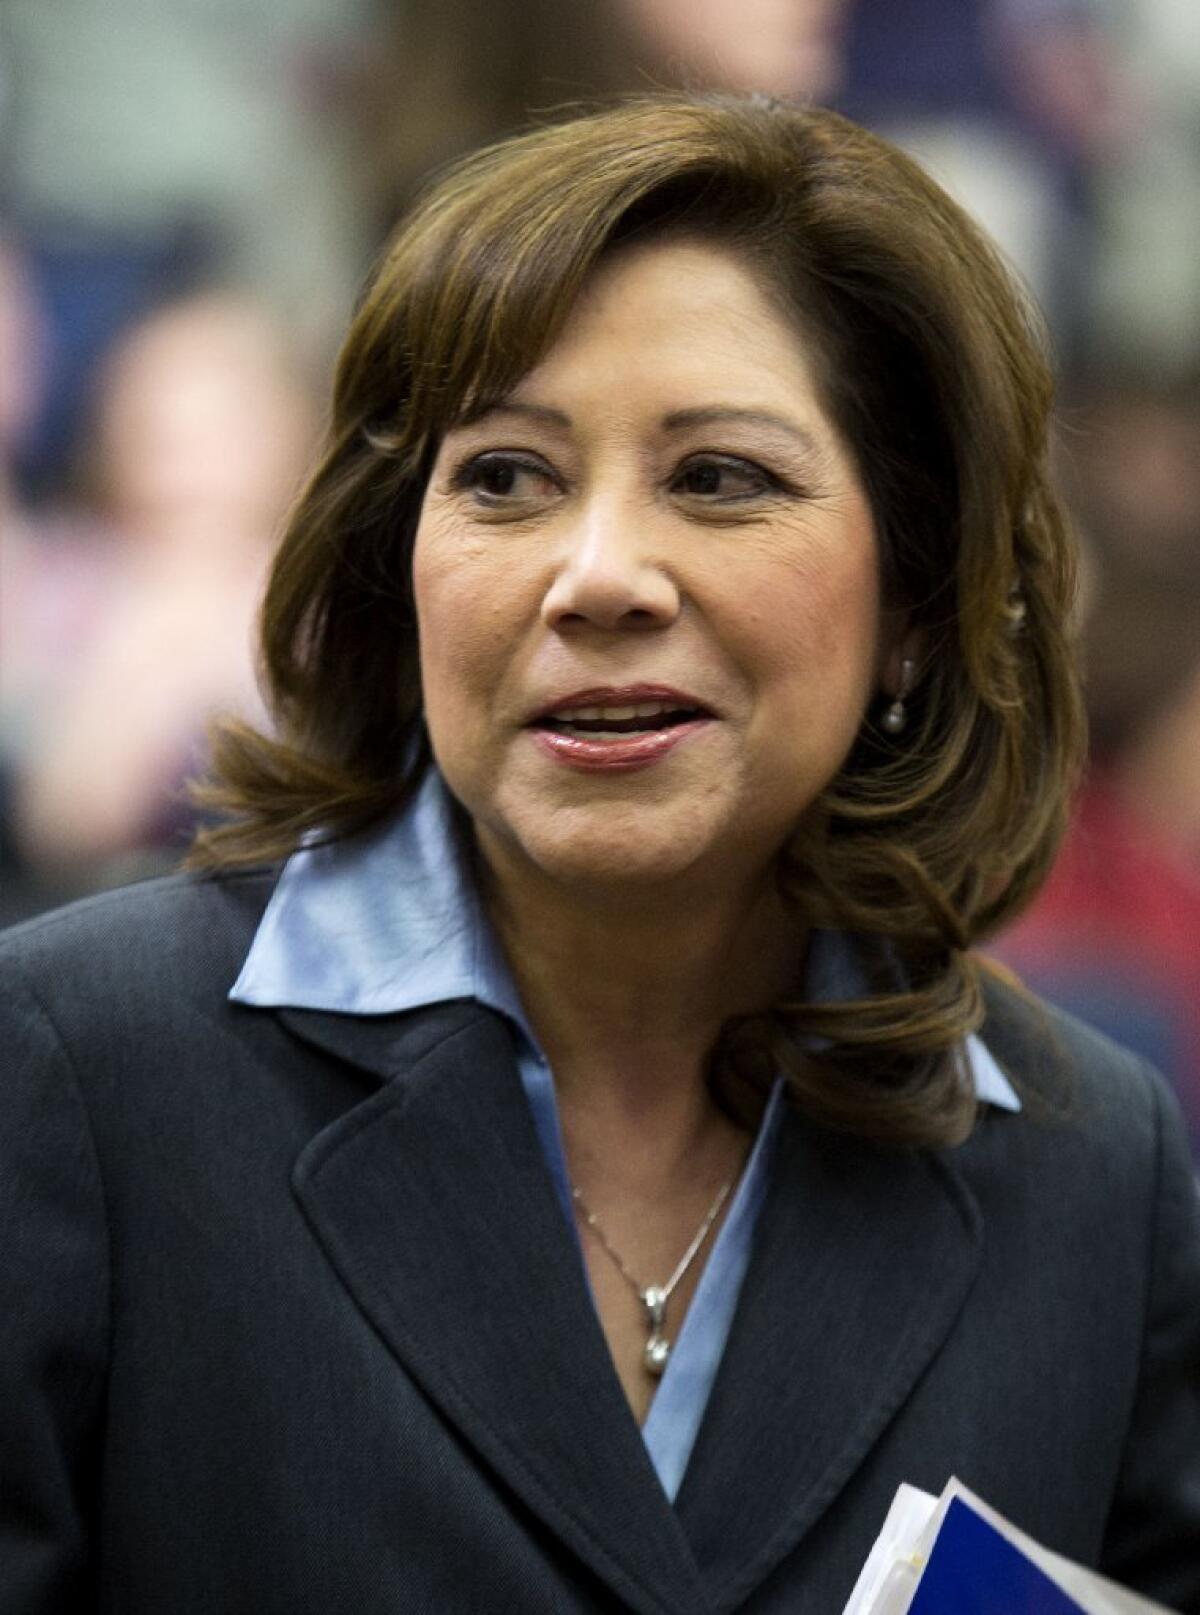 Former Labor Secretary Hilda Solis is running for a seat on the Los Angeles County Board of Supervisors.